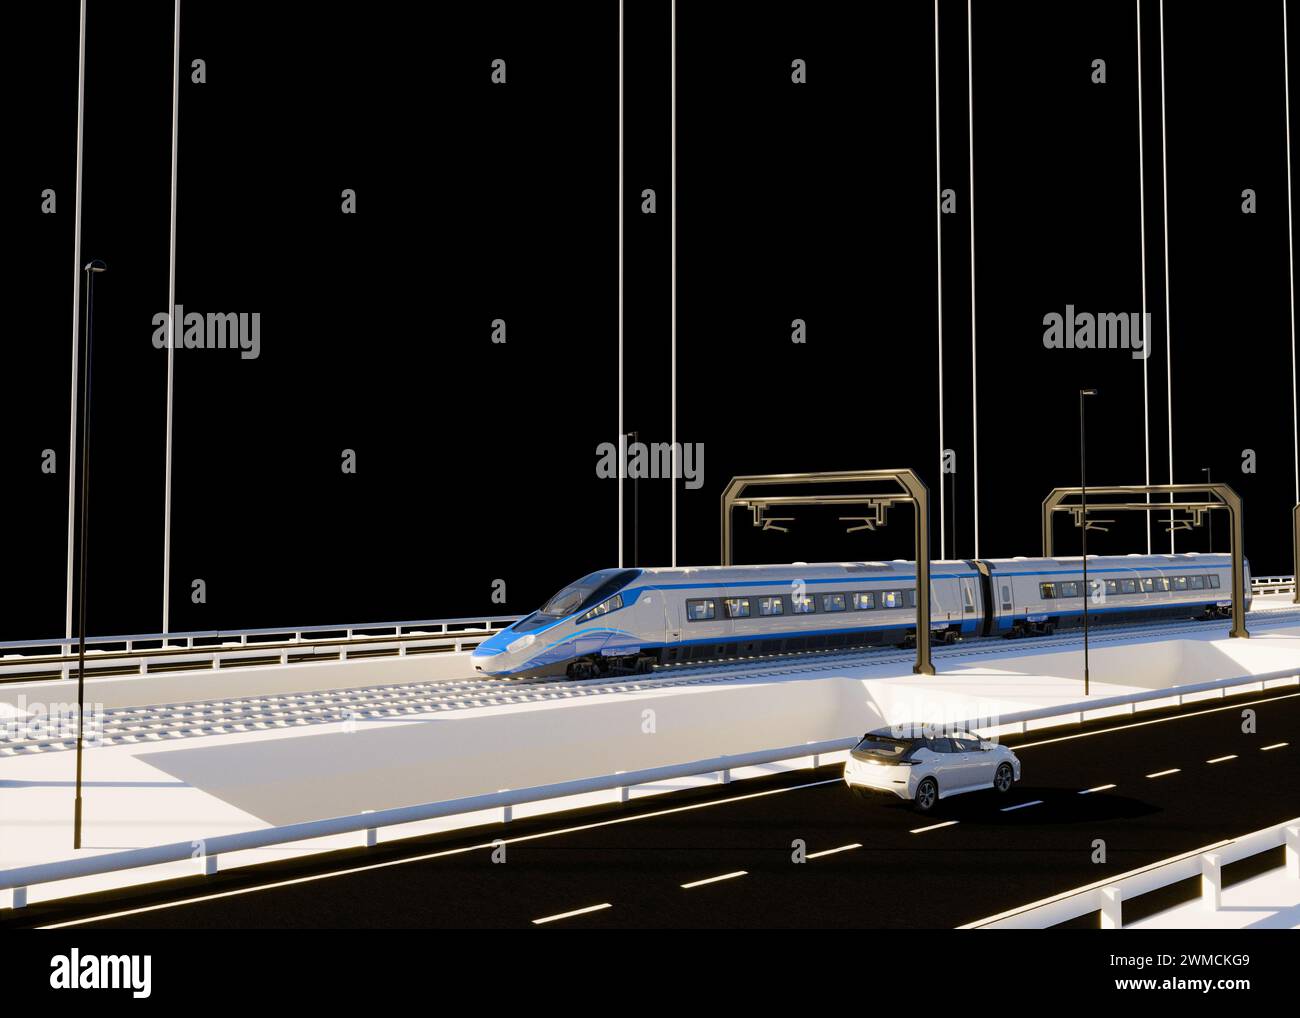 Bridge over the Strait of Messina, study of the deck and suspensions. Architectural project. Cars and trains traveling across the bridge. Italy Stock Photo